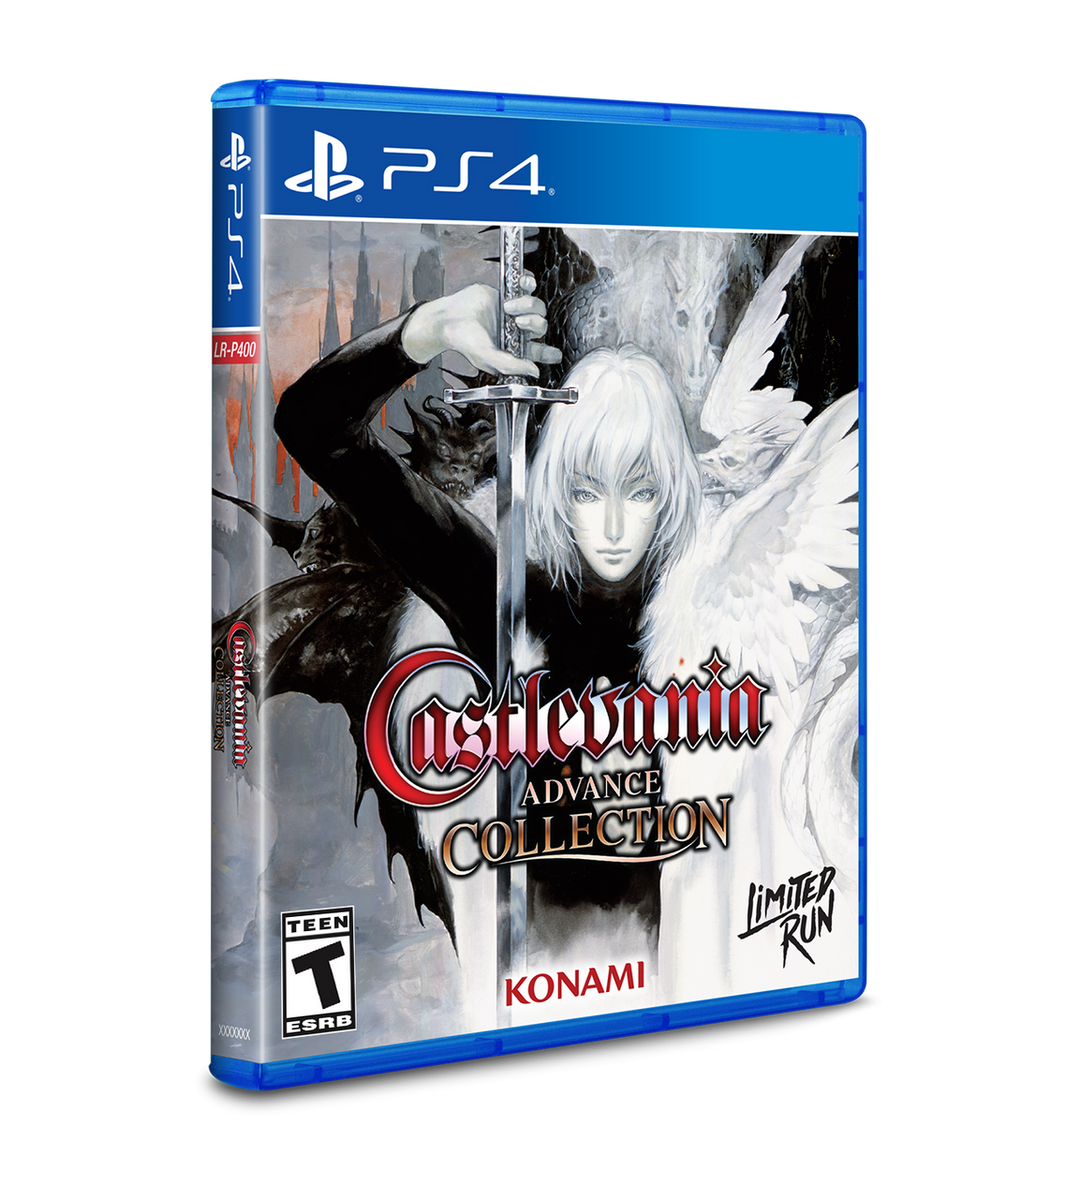 NEW Castlevania Advance Collection (Limited Run) (Aria of Sorrow 